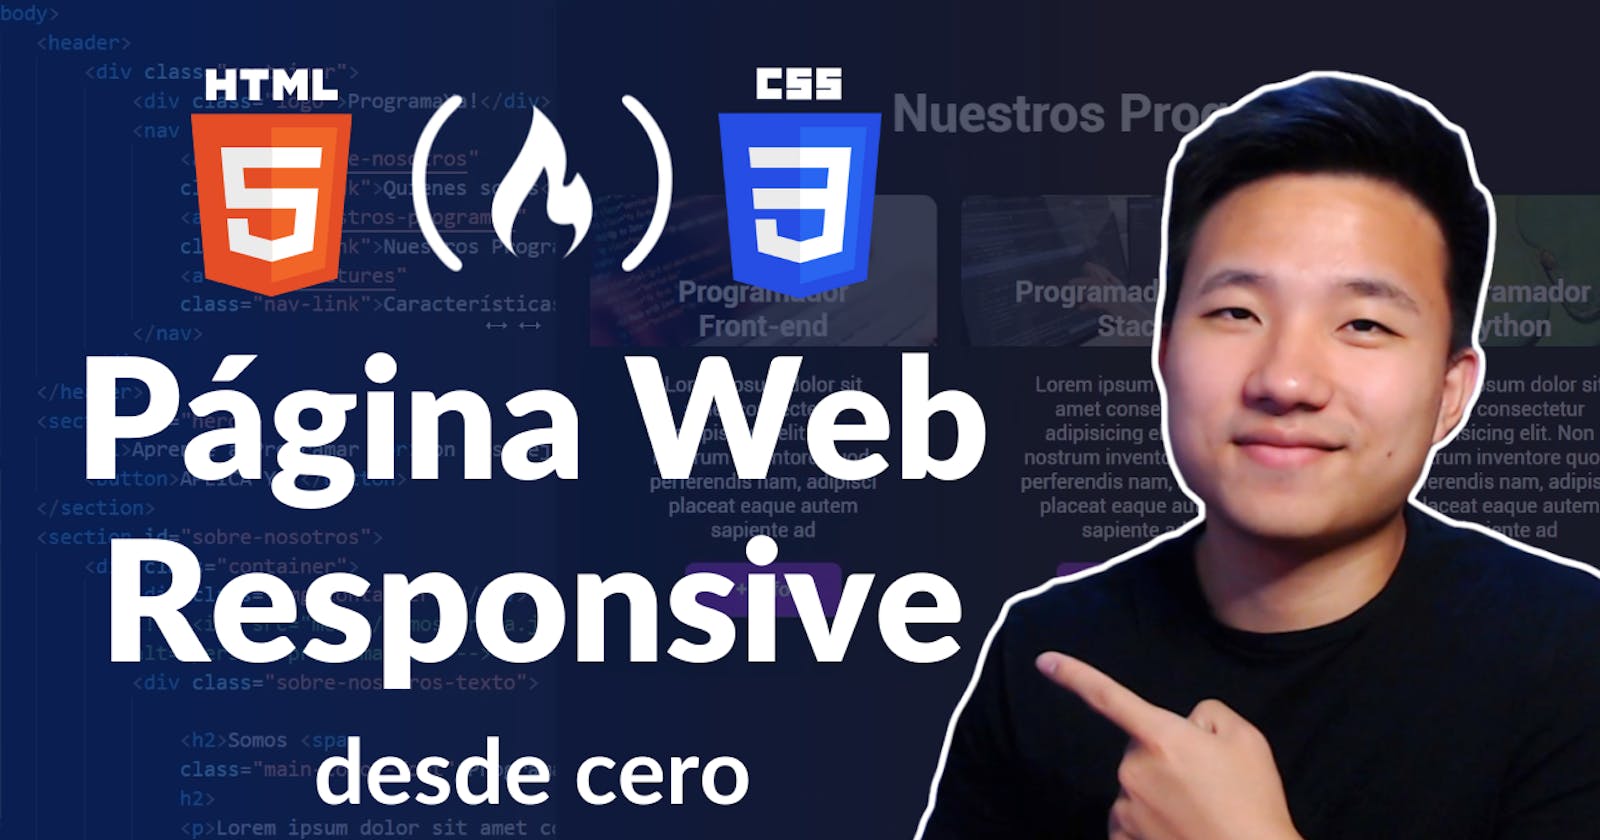 Build a Responsive Website with HTML and CSS - Course in Spanish